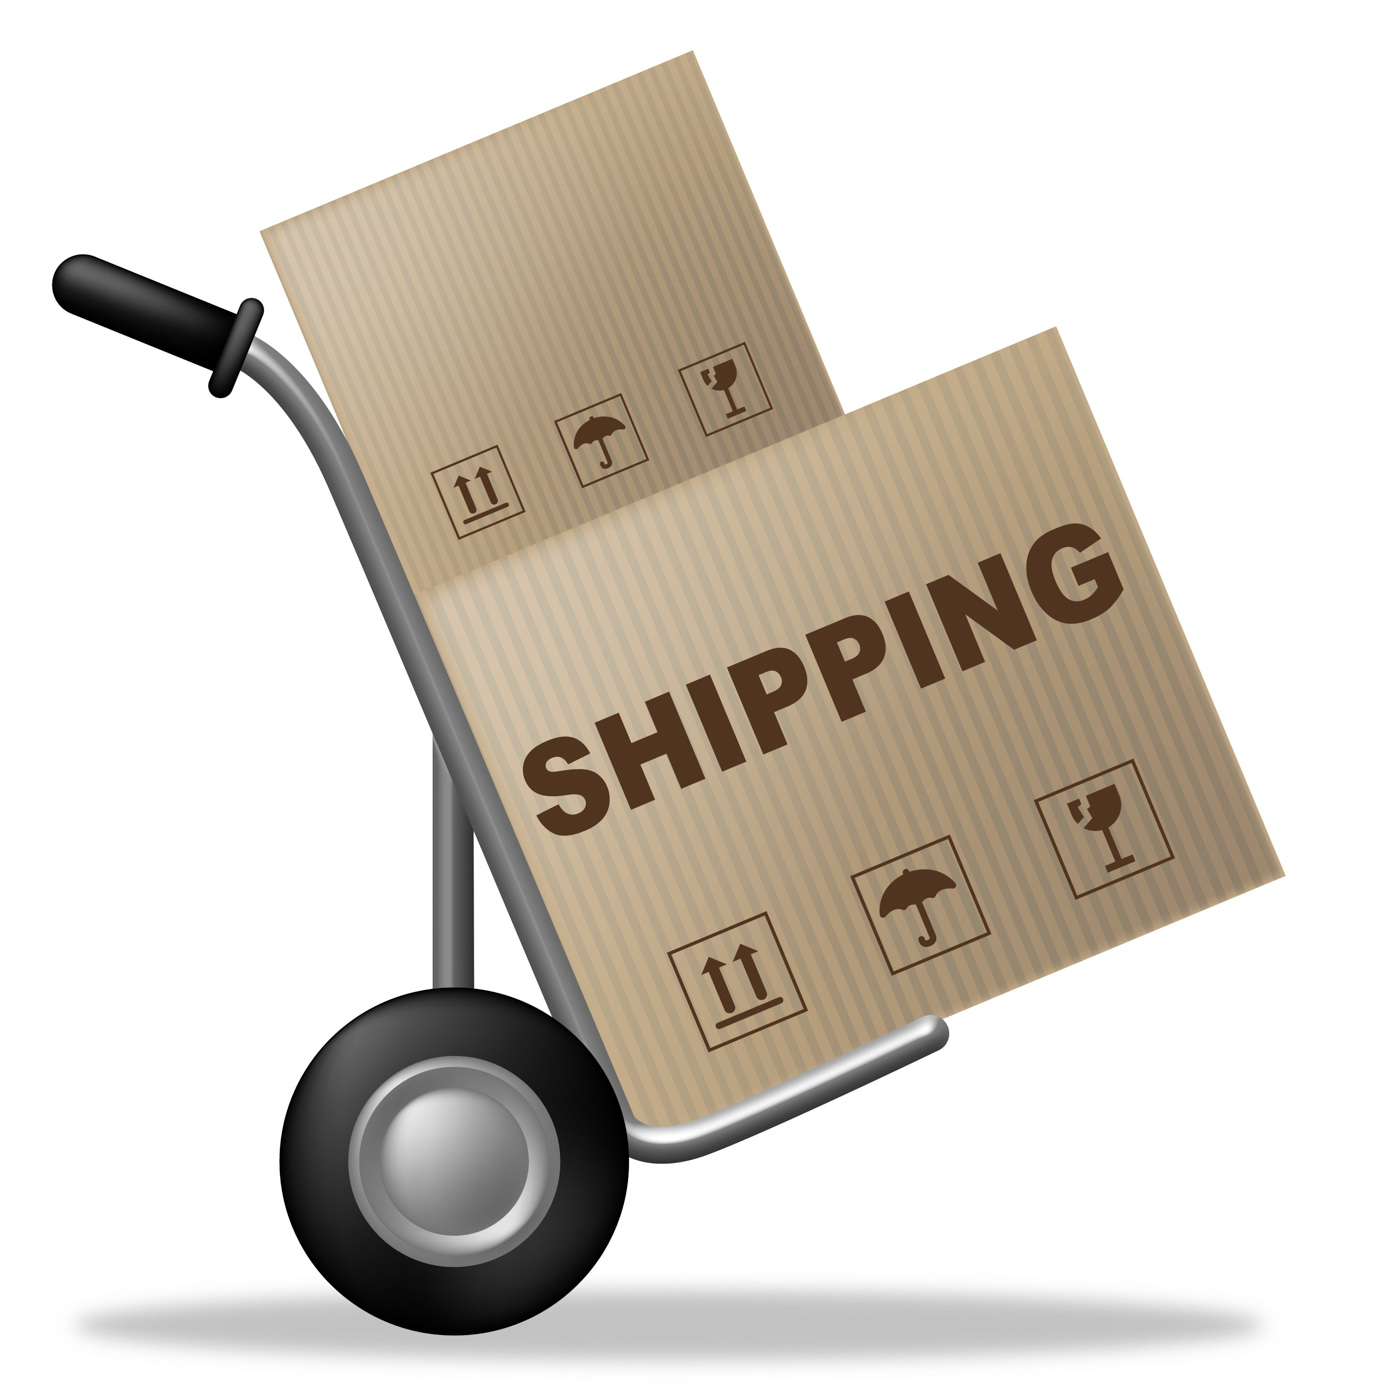 Shipping package indicates delivering parcel and packaging photo